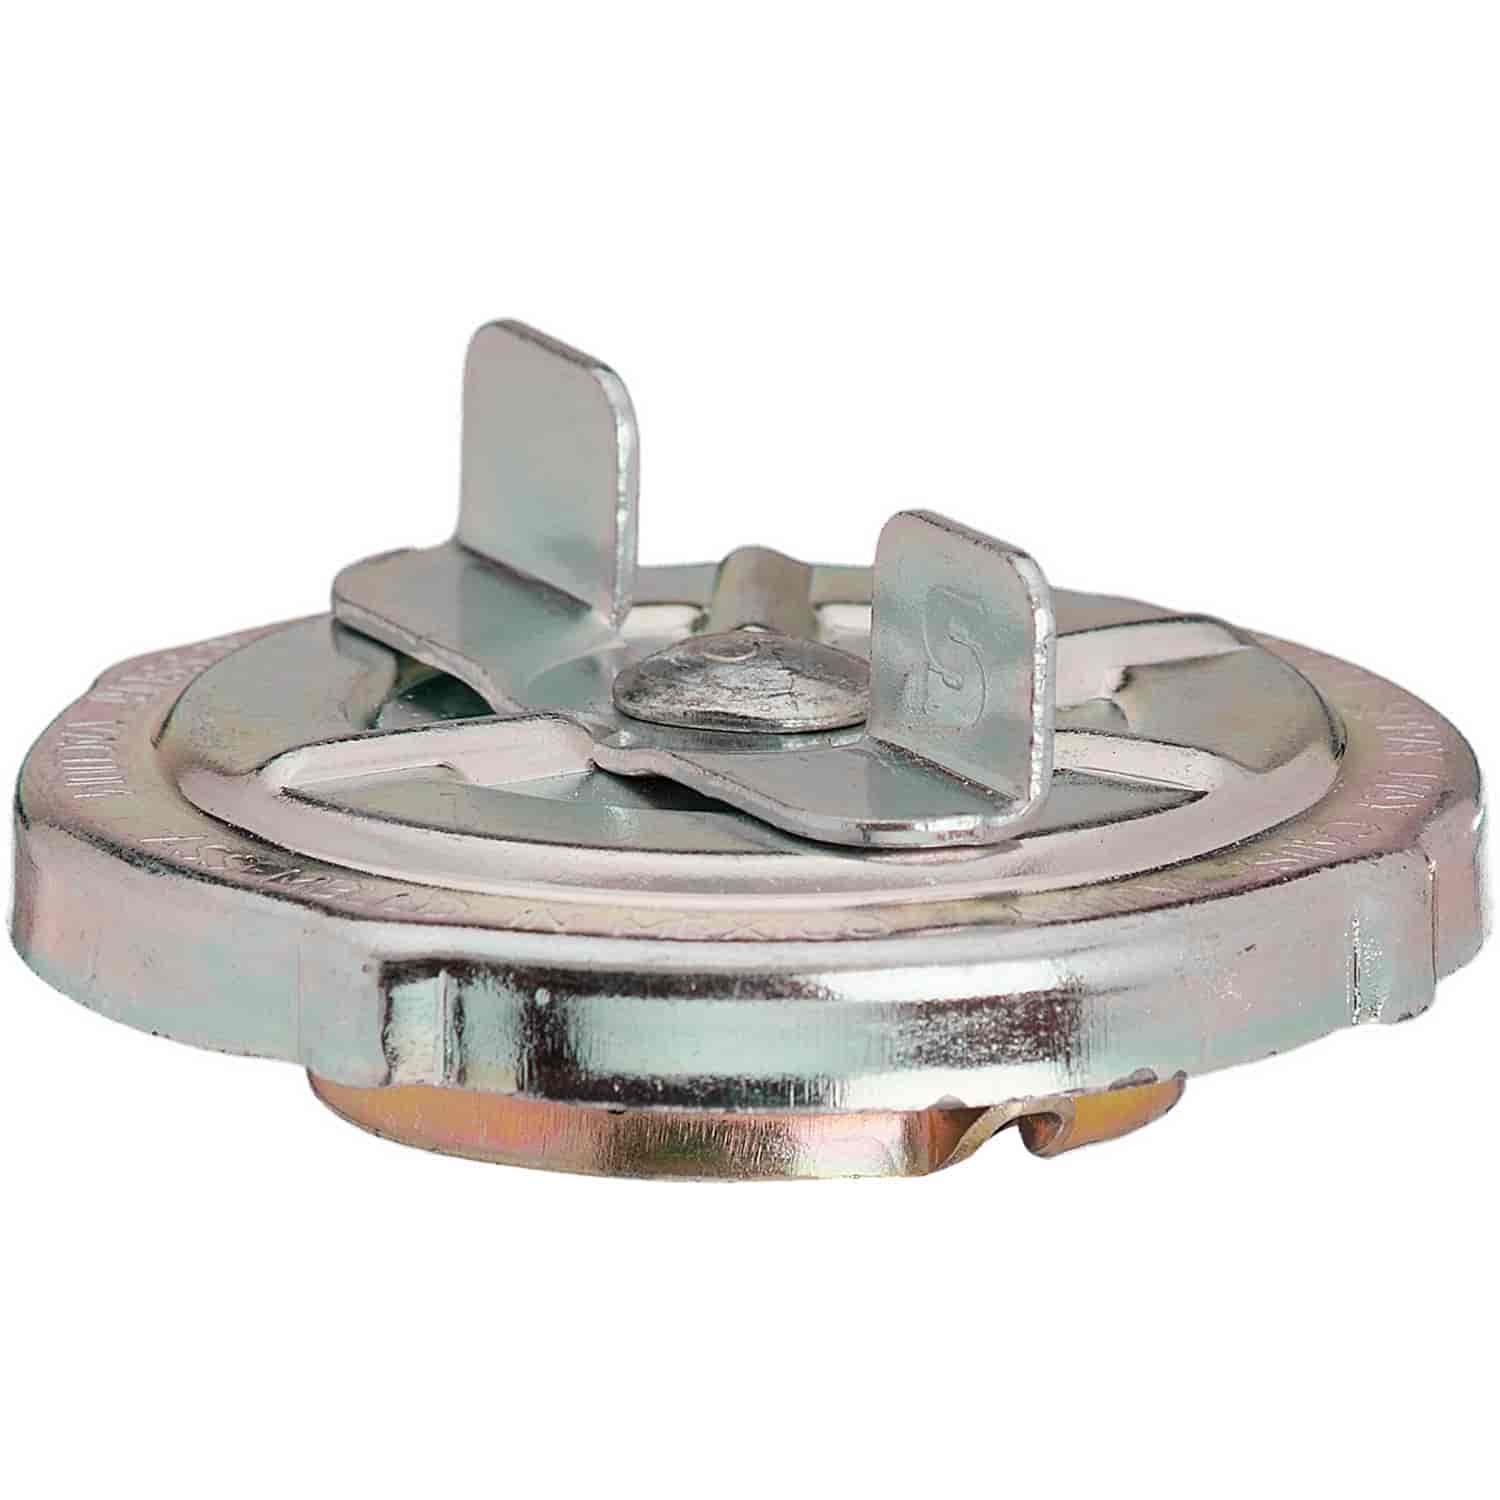 31630 Fuel Cap for Select 1980-1988 Ford Models